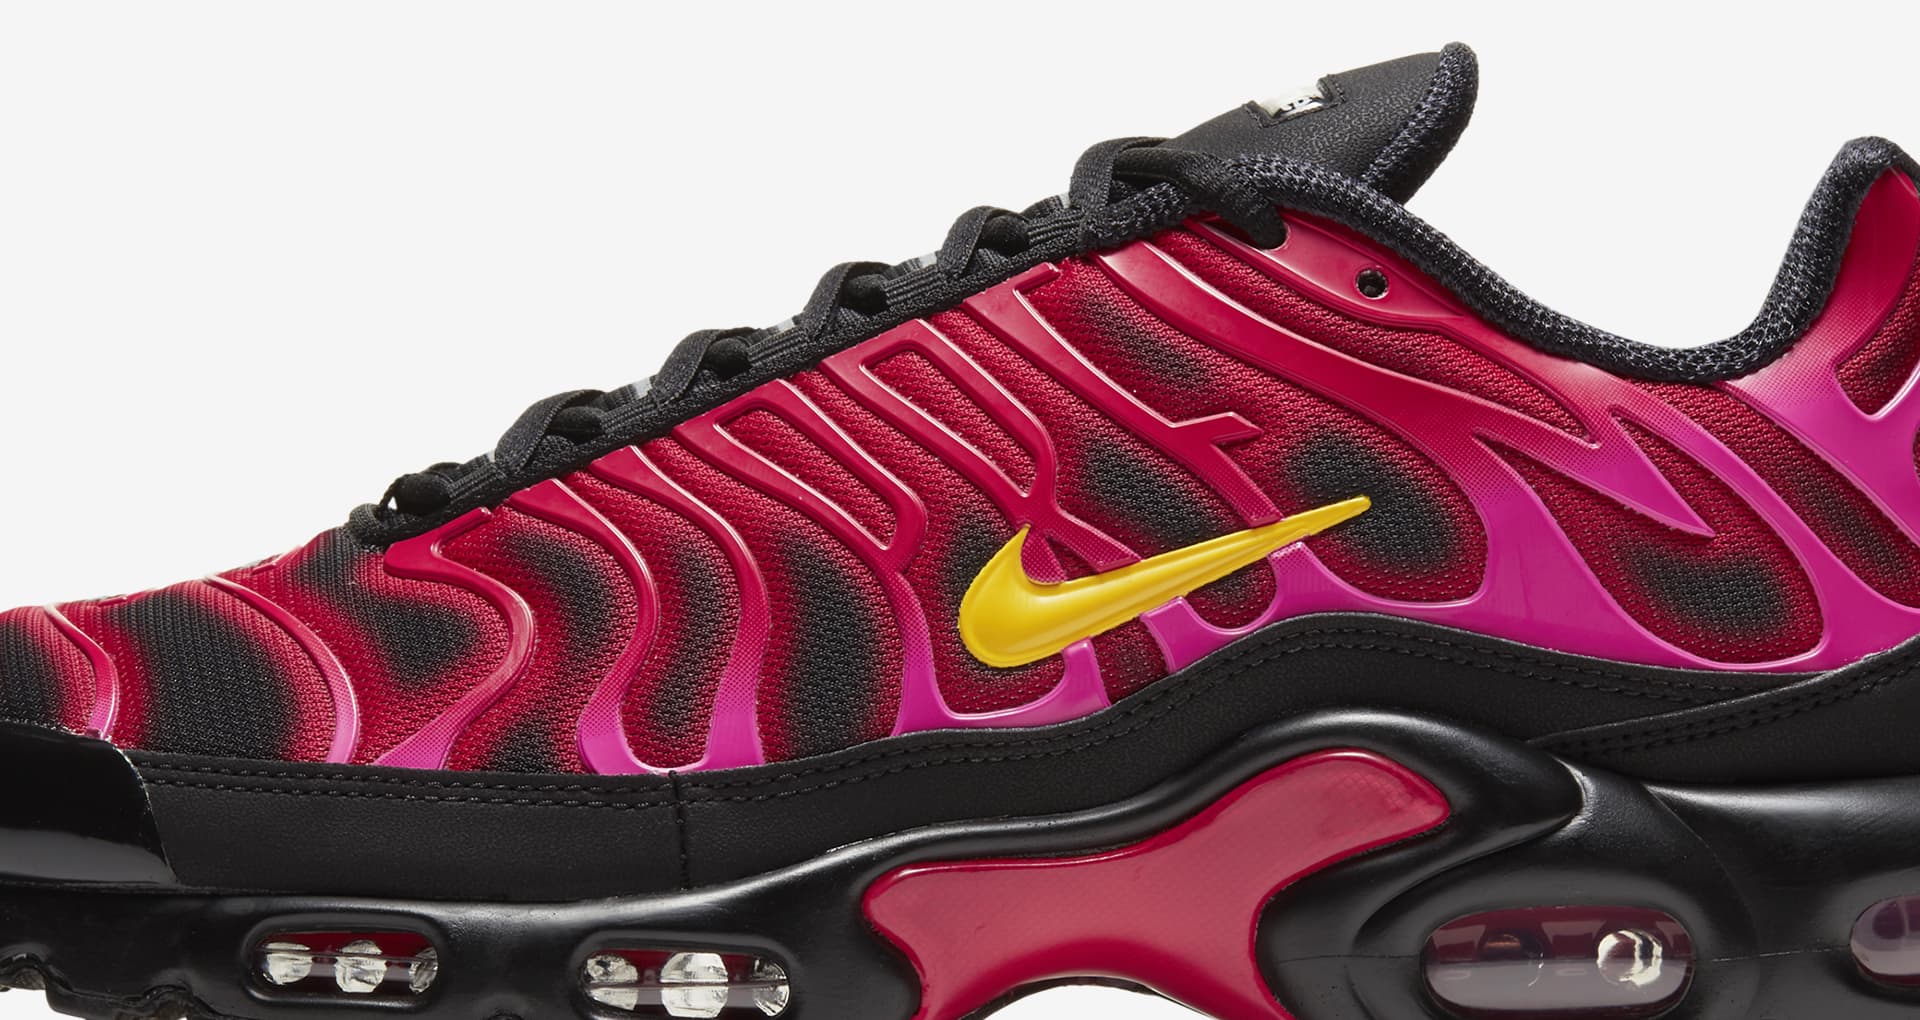 Air Max Plus x Supreme 'Fire Pink' Release Nike SNKRS GB